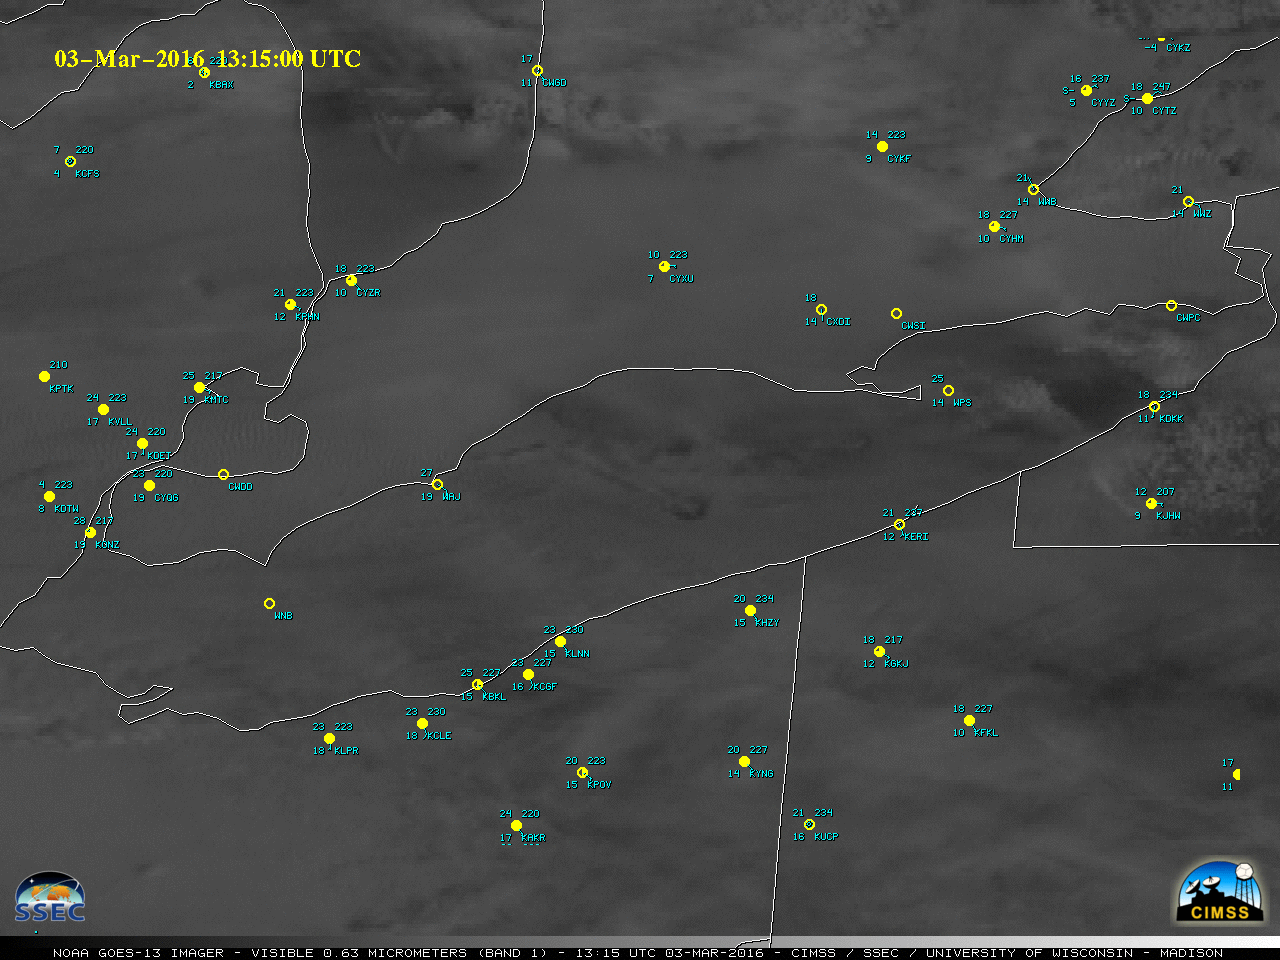 GOES-13 Visible (0.63 µm) images, centered over Lake Erie [click to enlarge]